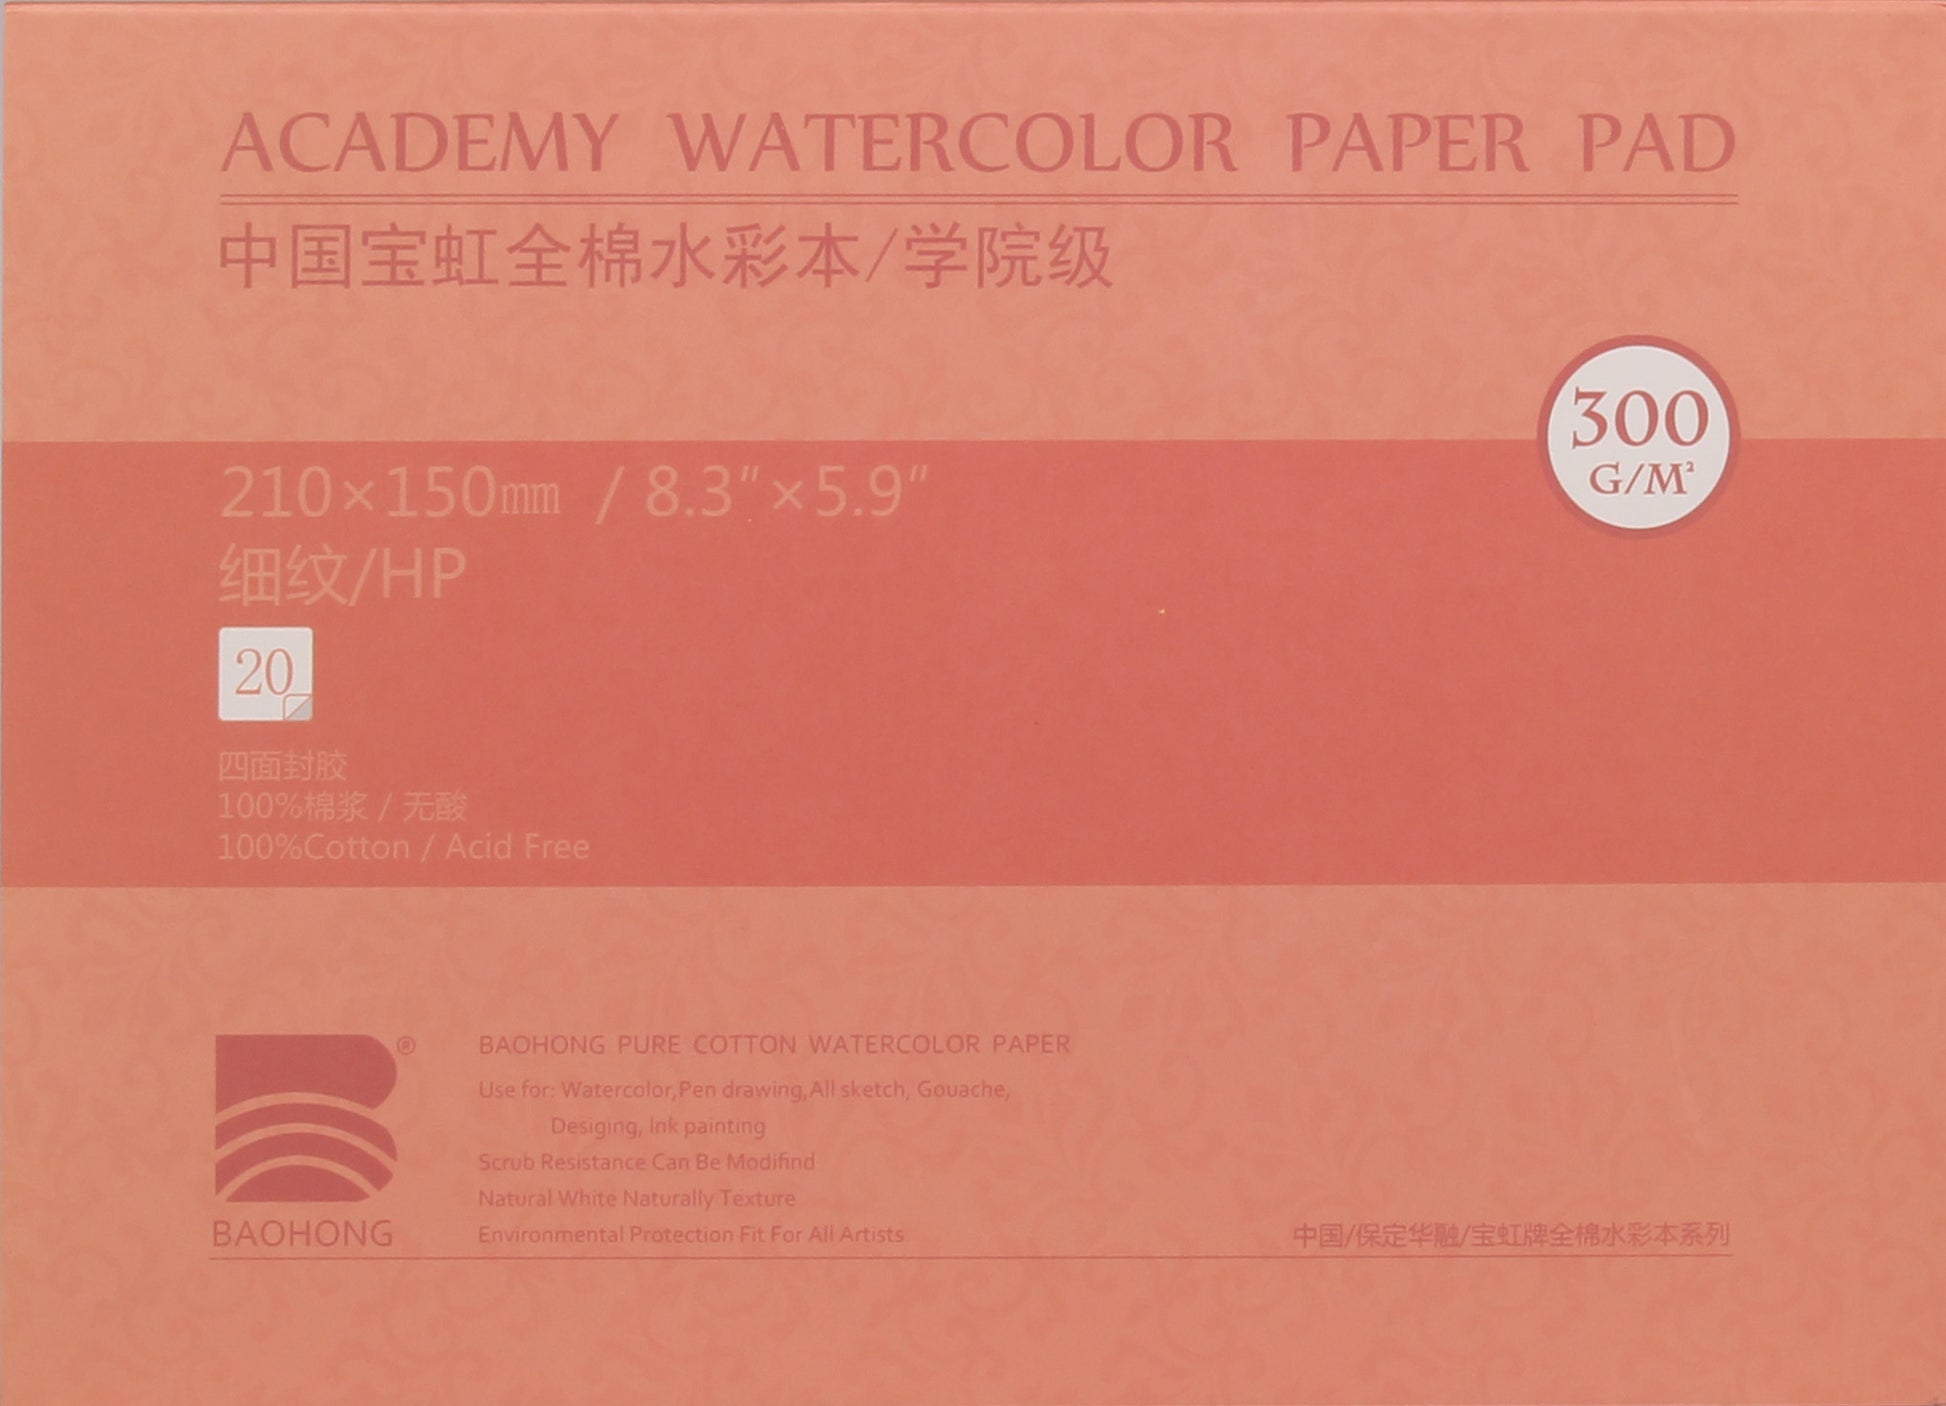 BAOHONG Academy Watercolor Paper Pack, 100% Cotton, Acid-free